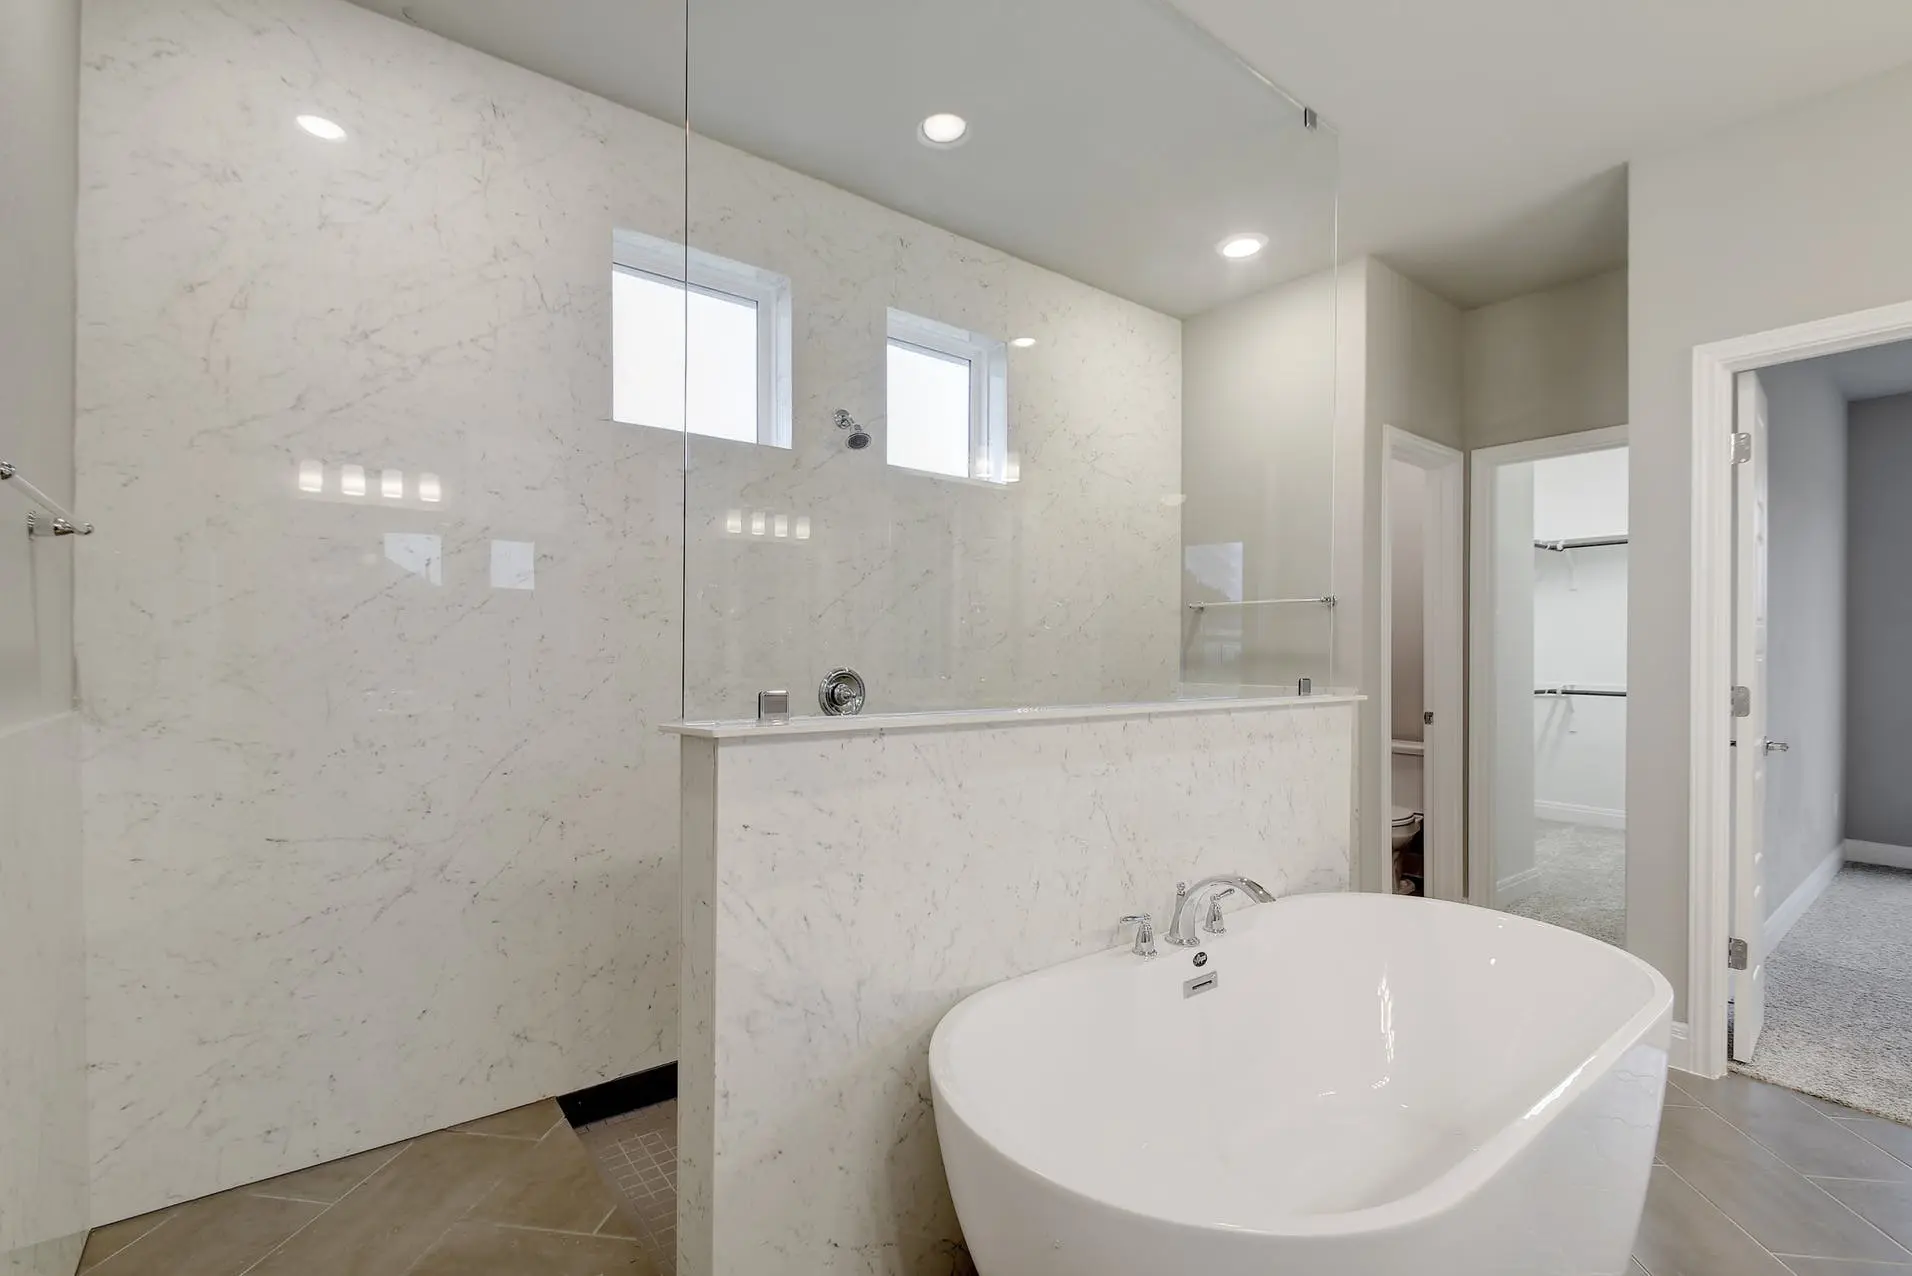 A white bathroom with a tub and shower.